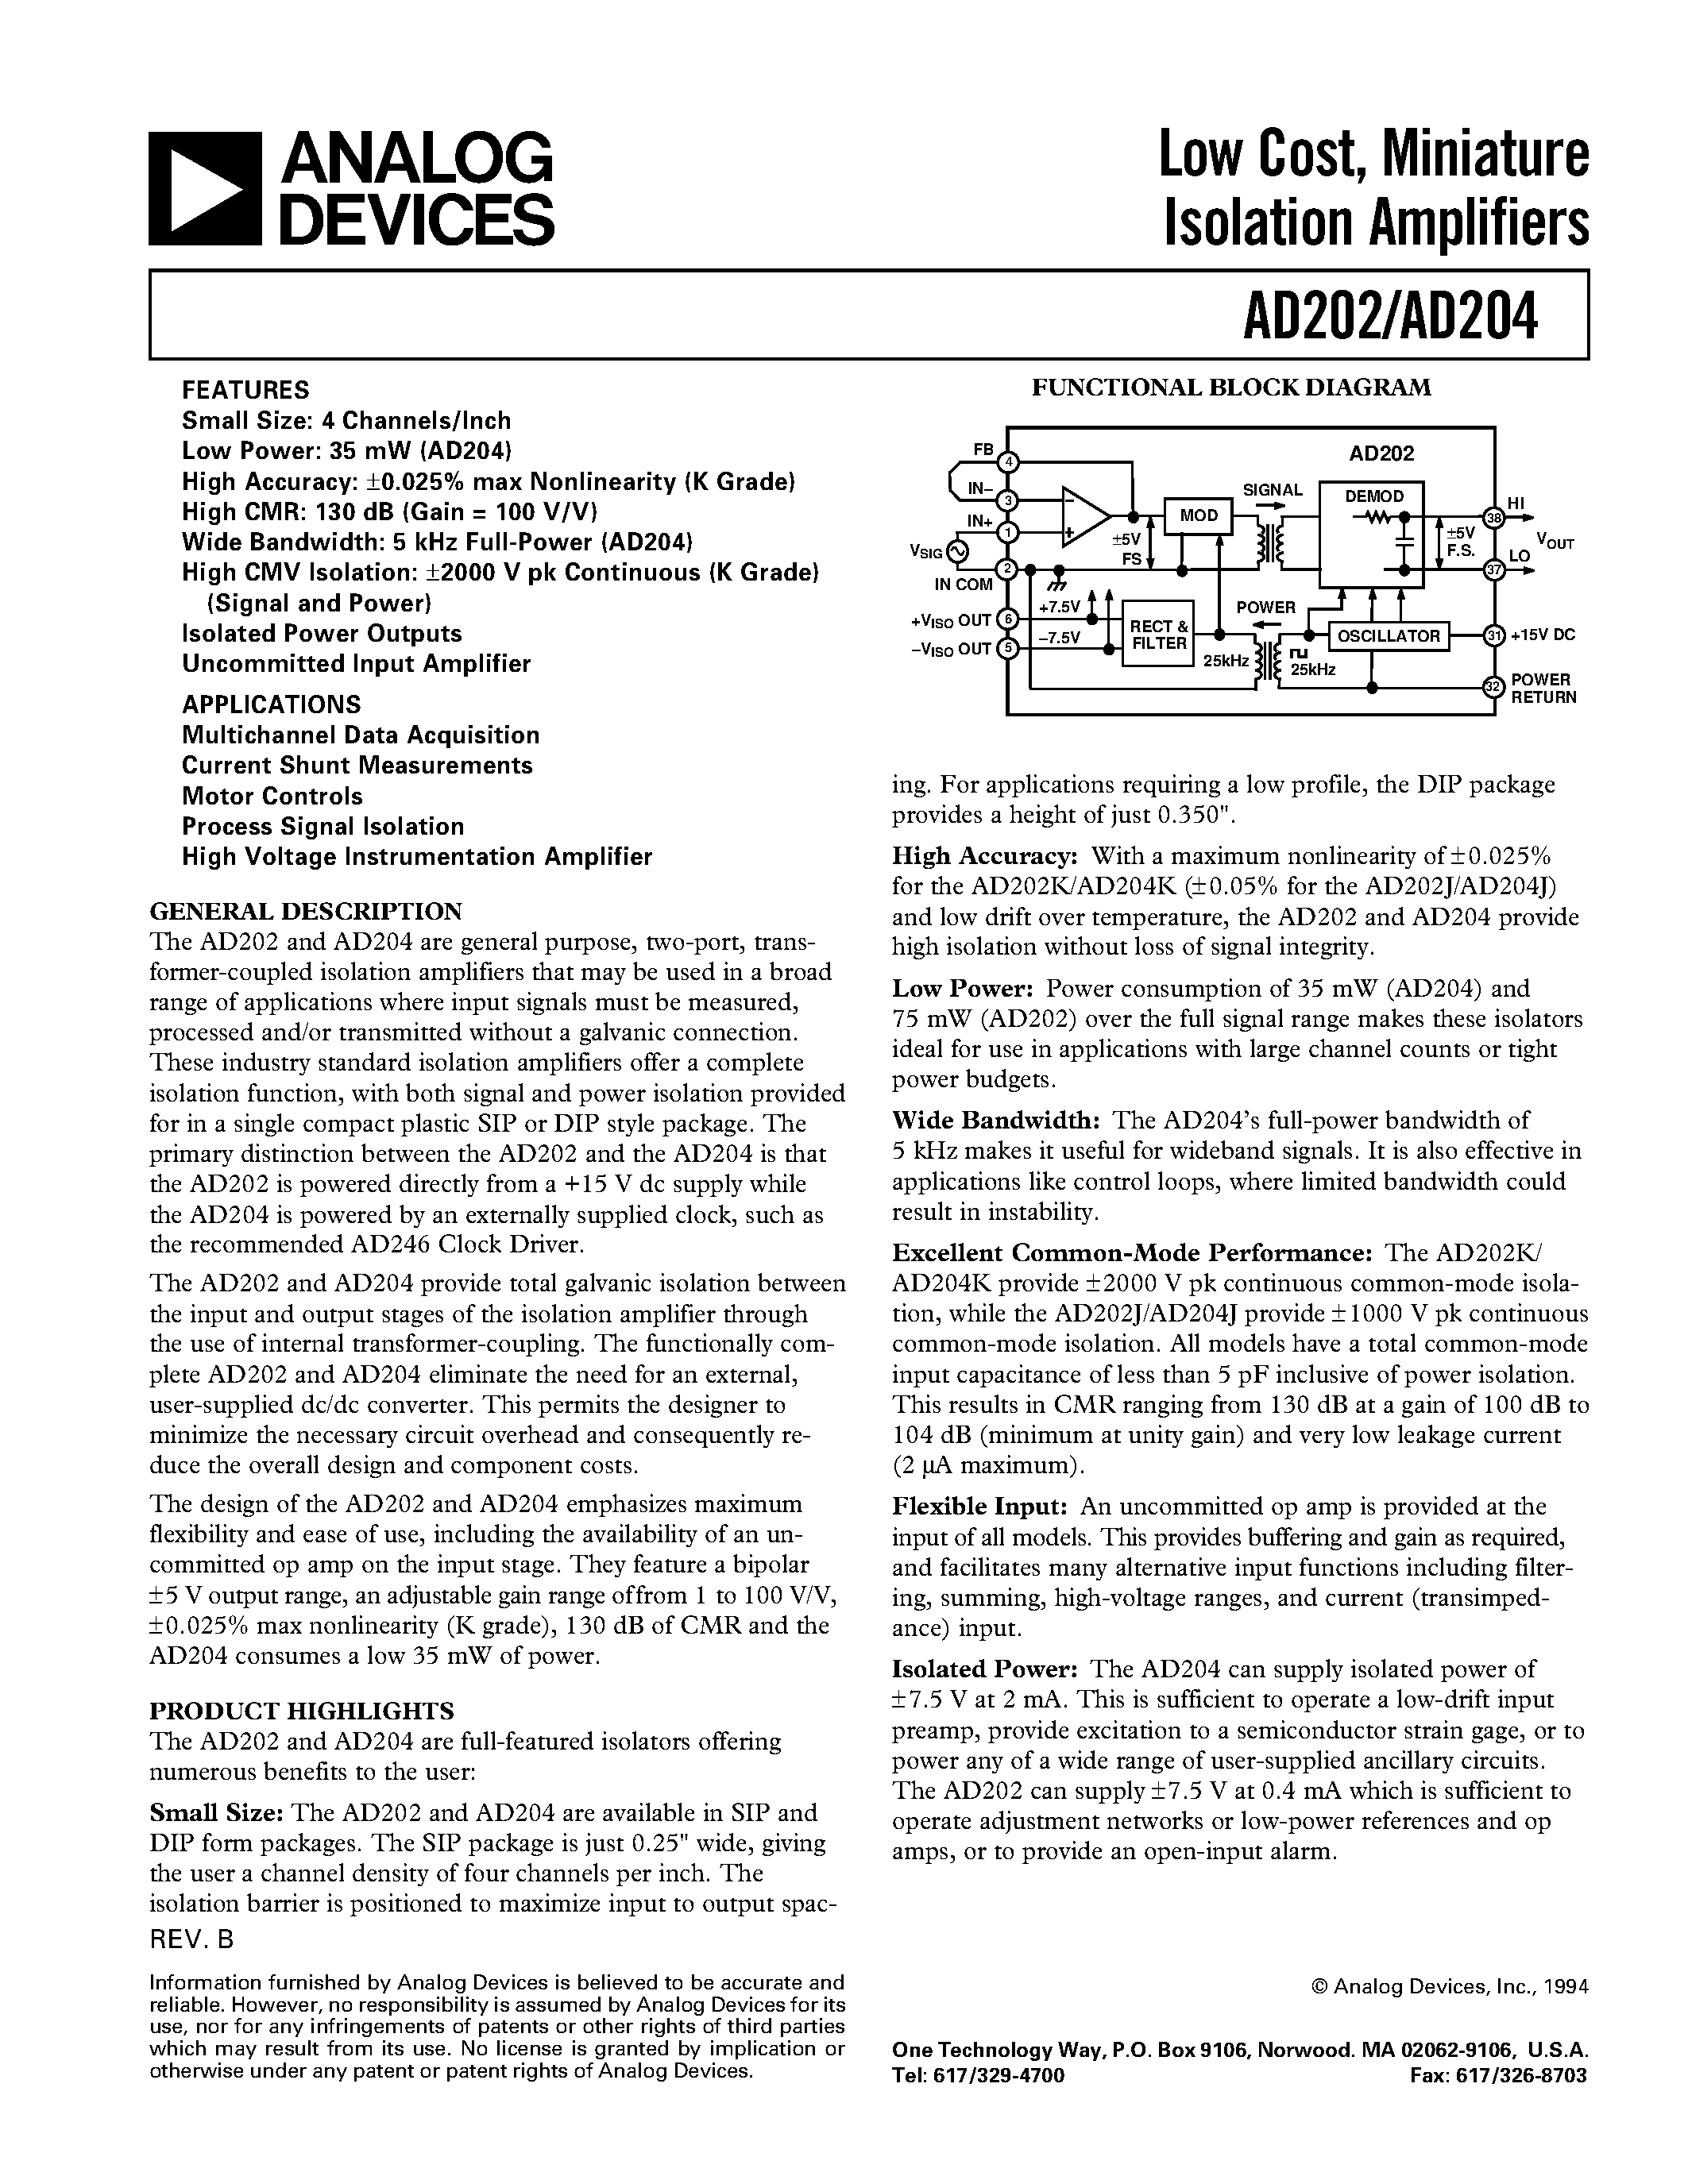 Datasheet AD202 - Low Cost/ Miniature Isolation Amplifiers page 1